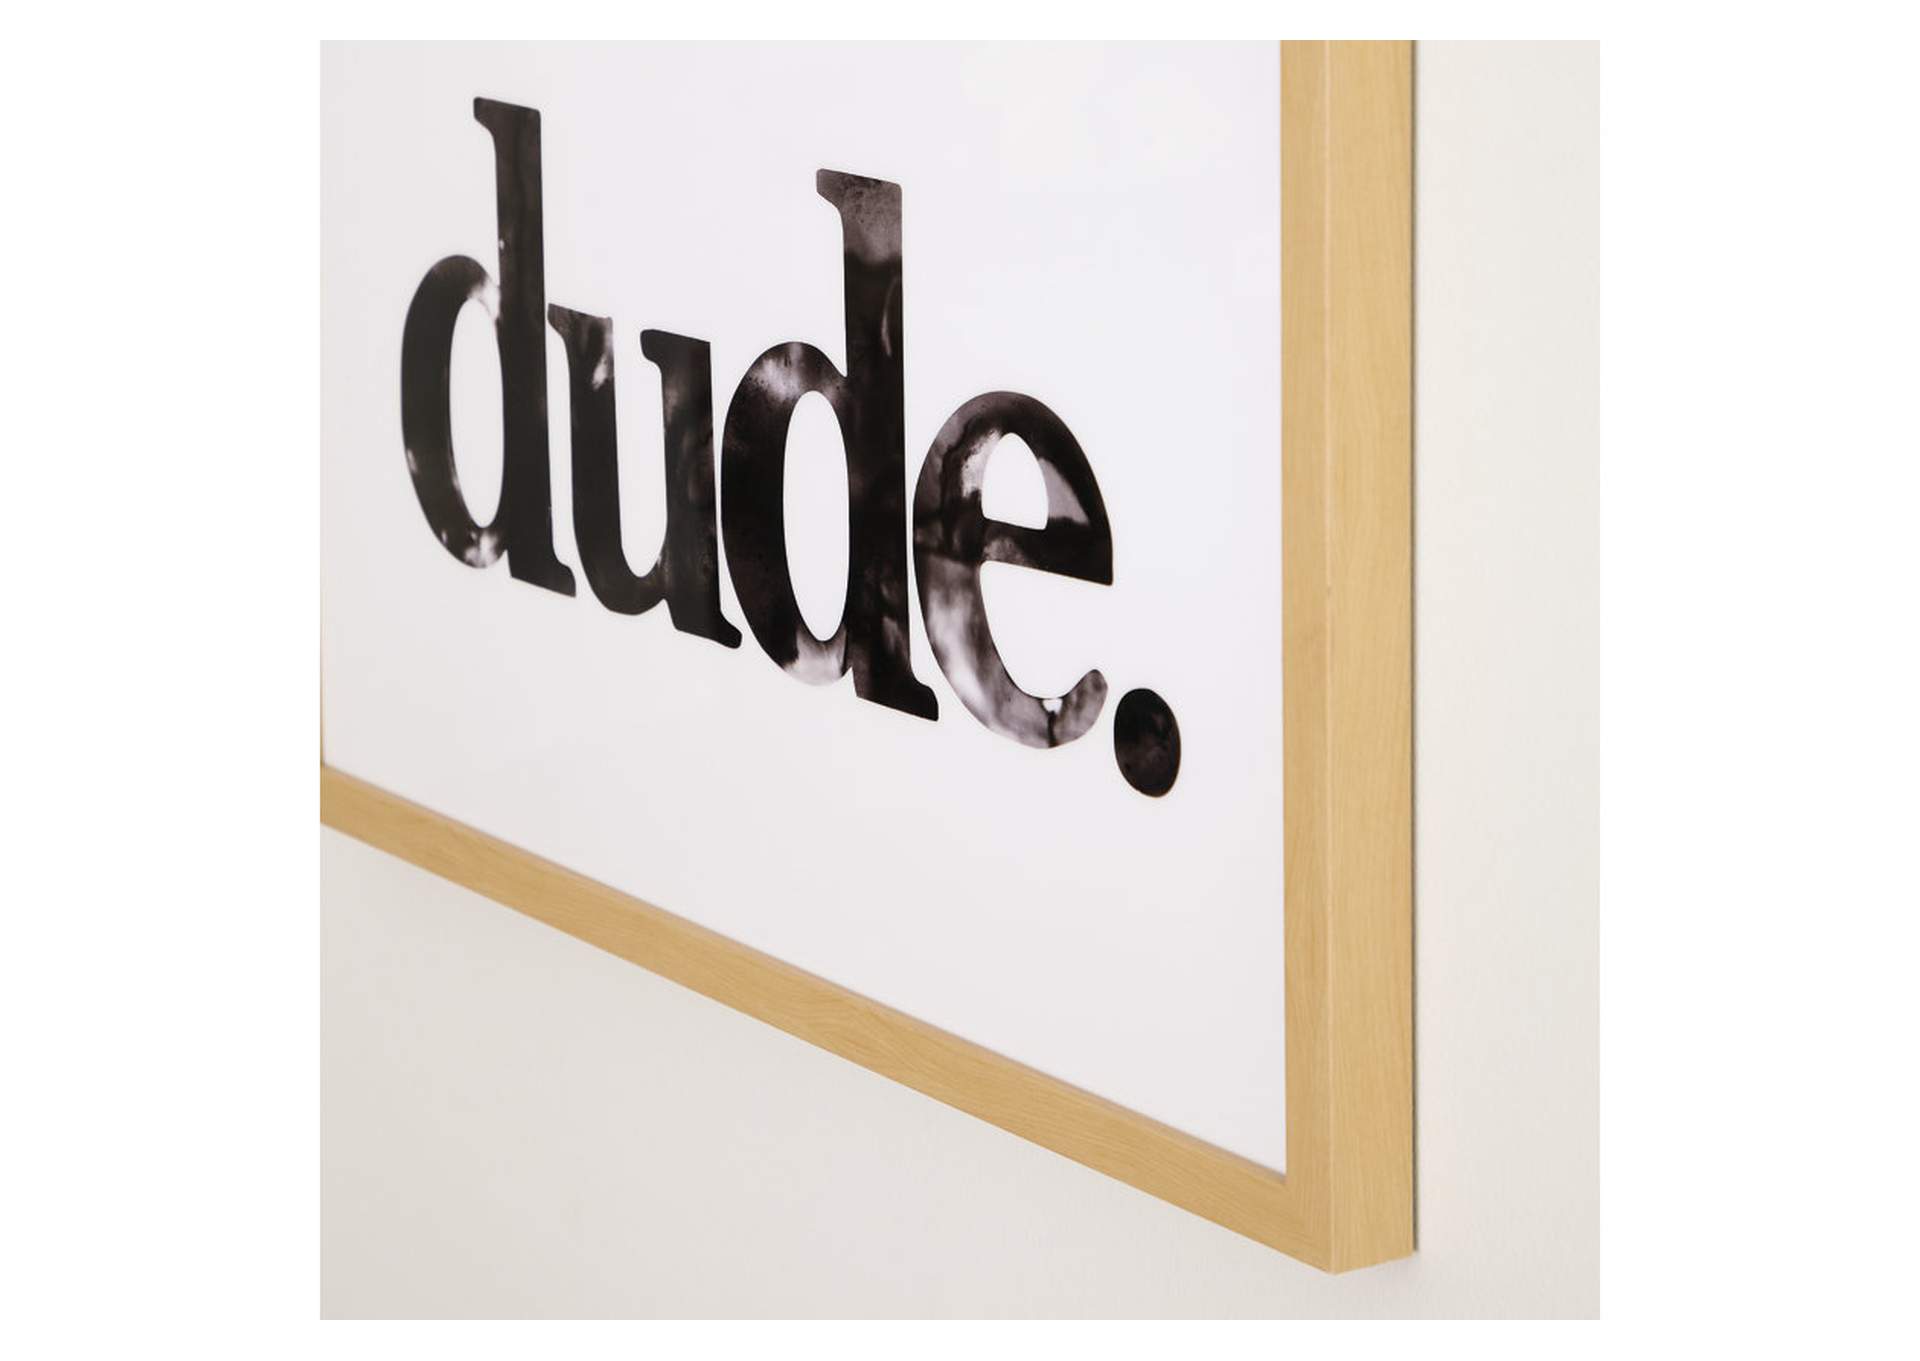 Dude Wall Art,Signature Design By Ashley